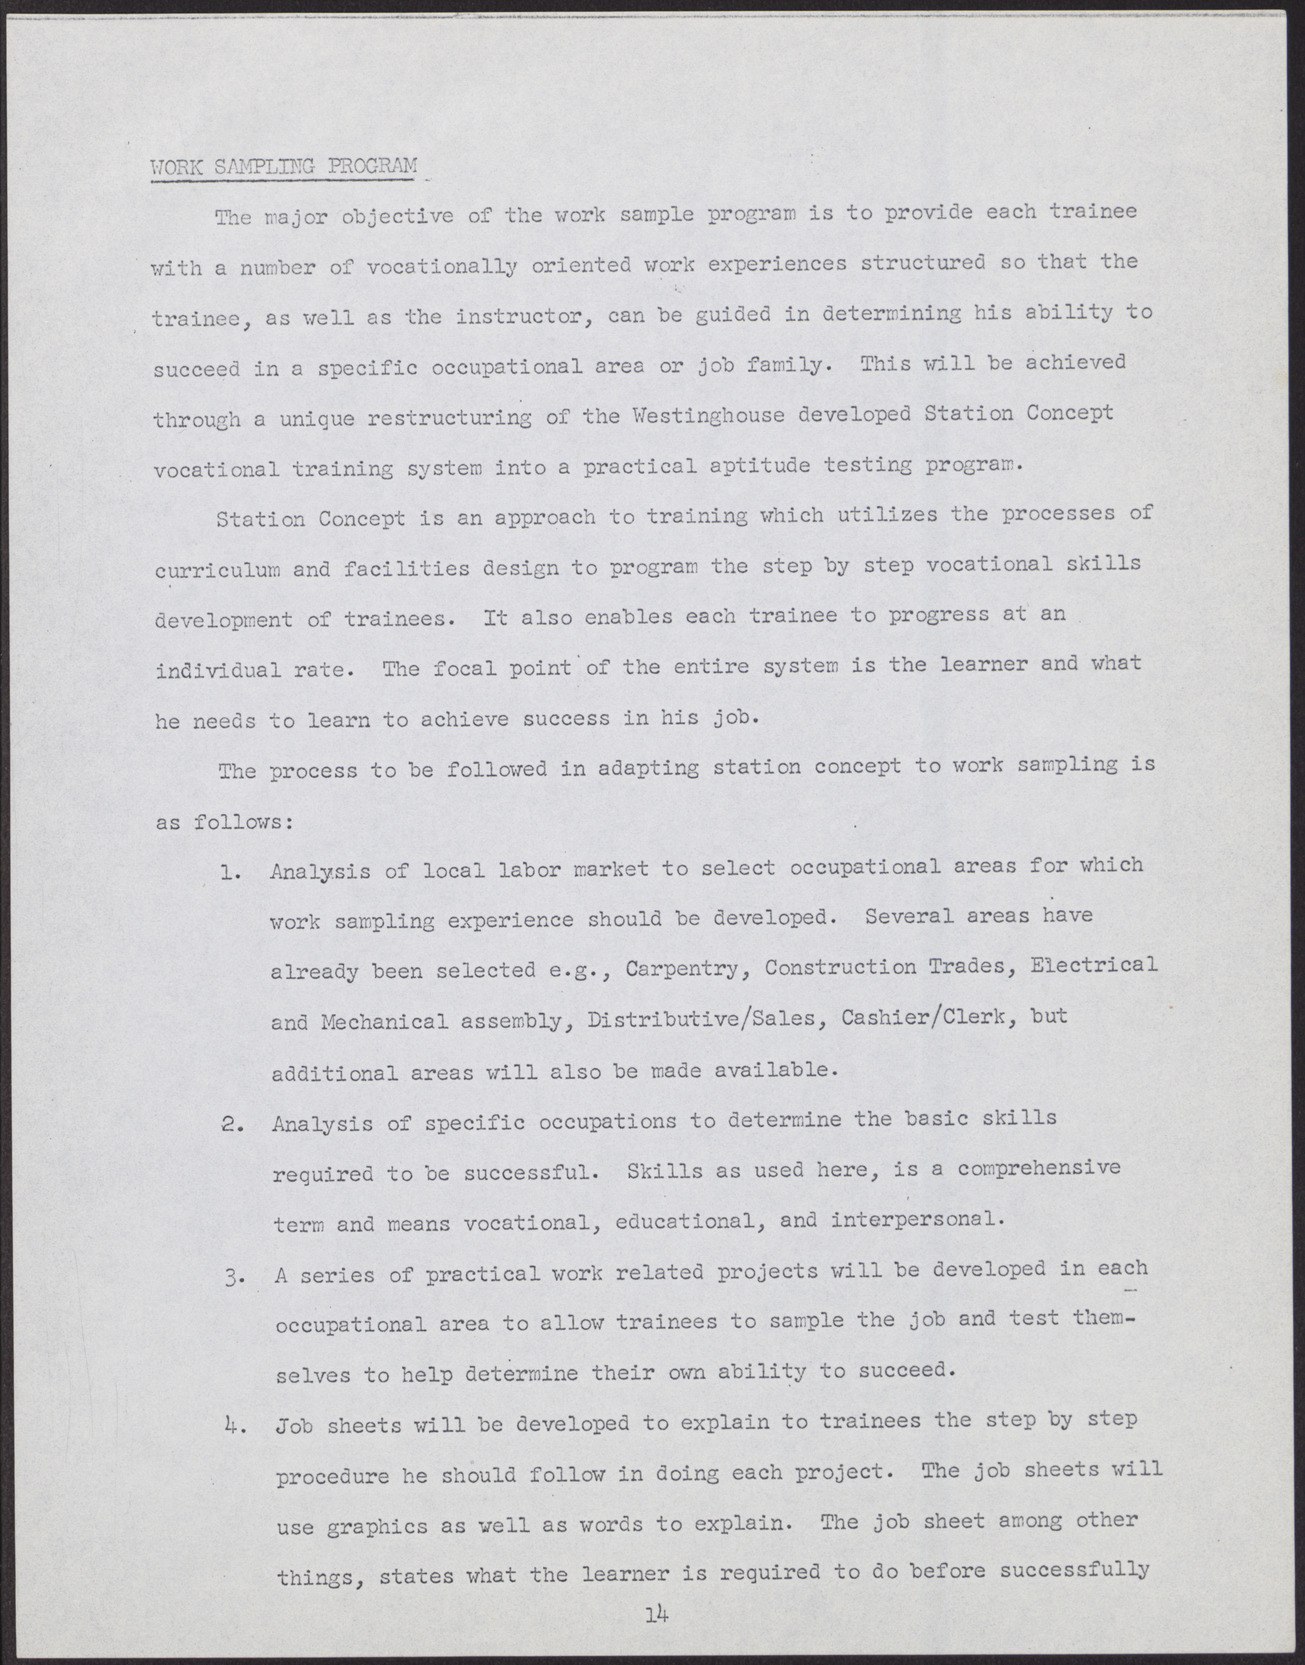 Proposal to the Clark County, Nevada Concentrated Employment Program (21 pages, missing some pages/sections listed in its table of contents), July 2, 1968, page 18